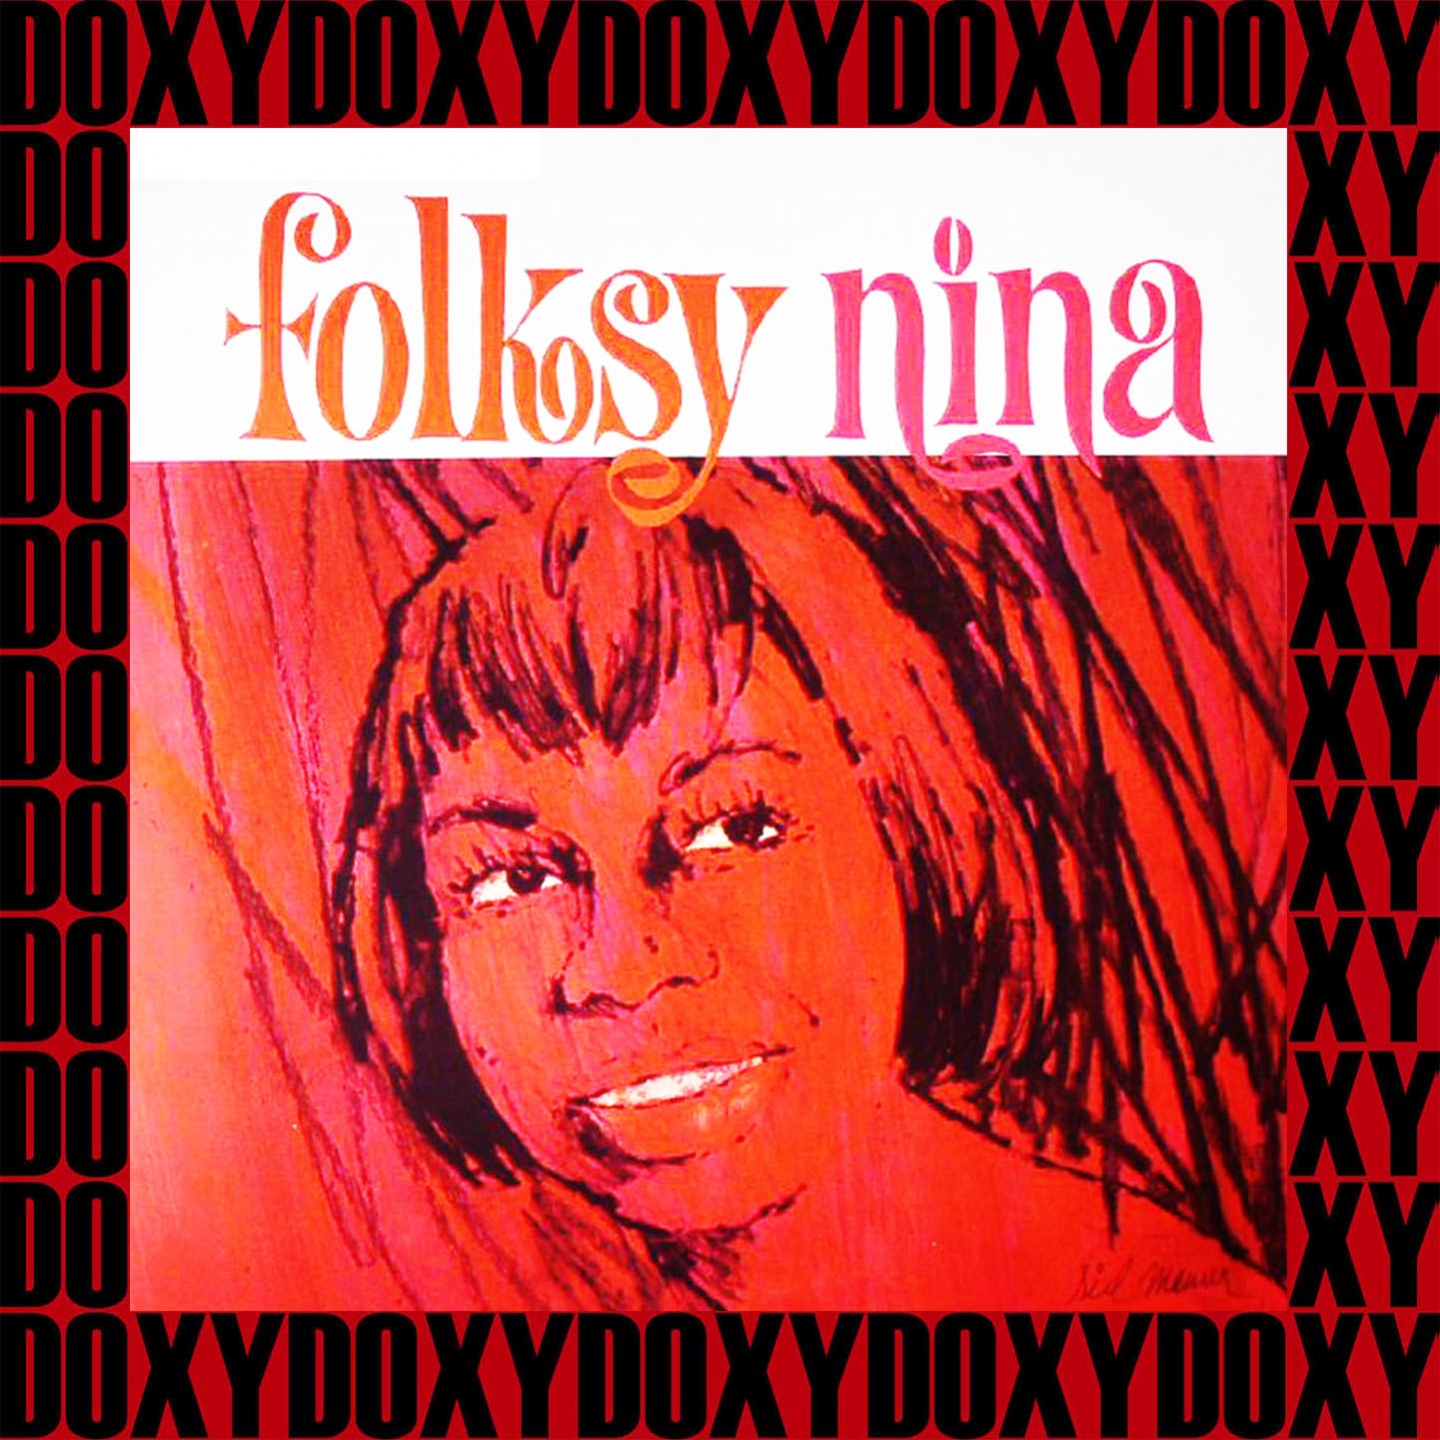 Folksy Nina (Remastered Version) (Doxy Collection)